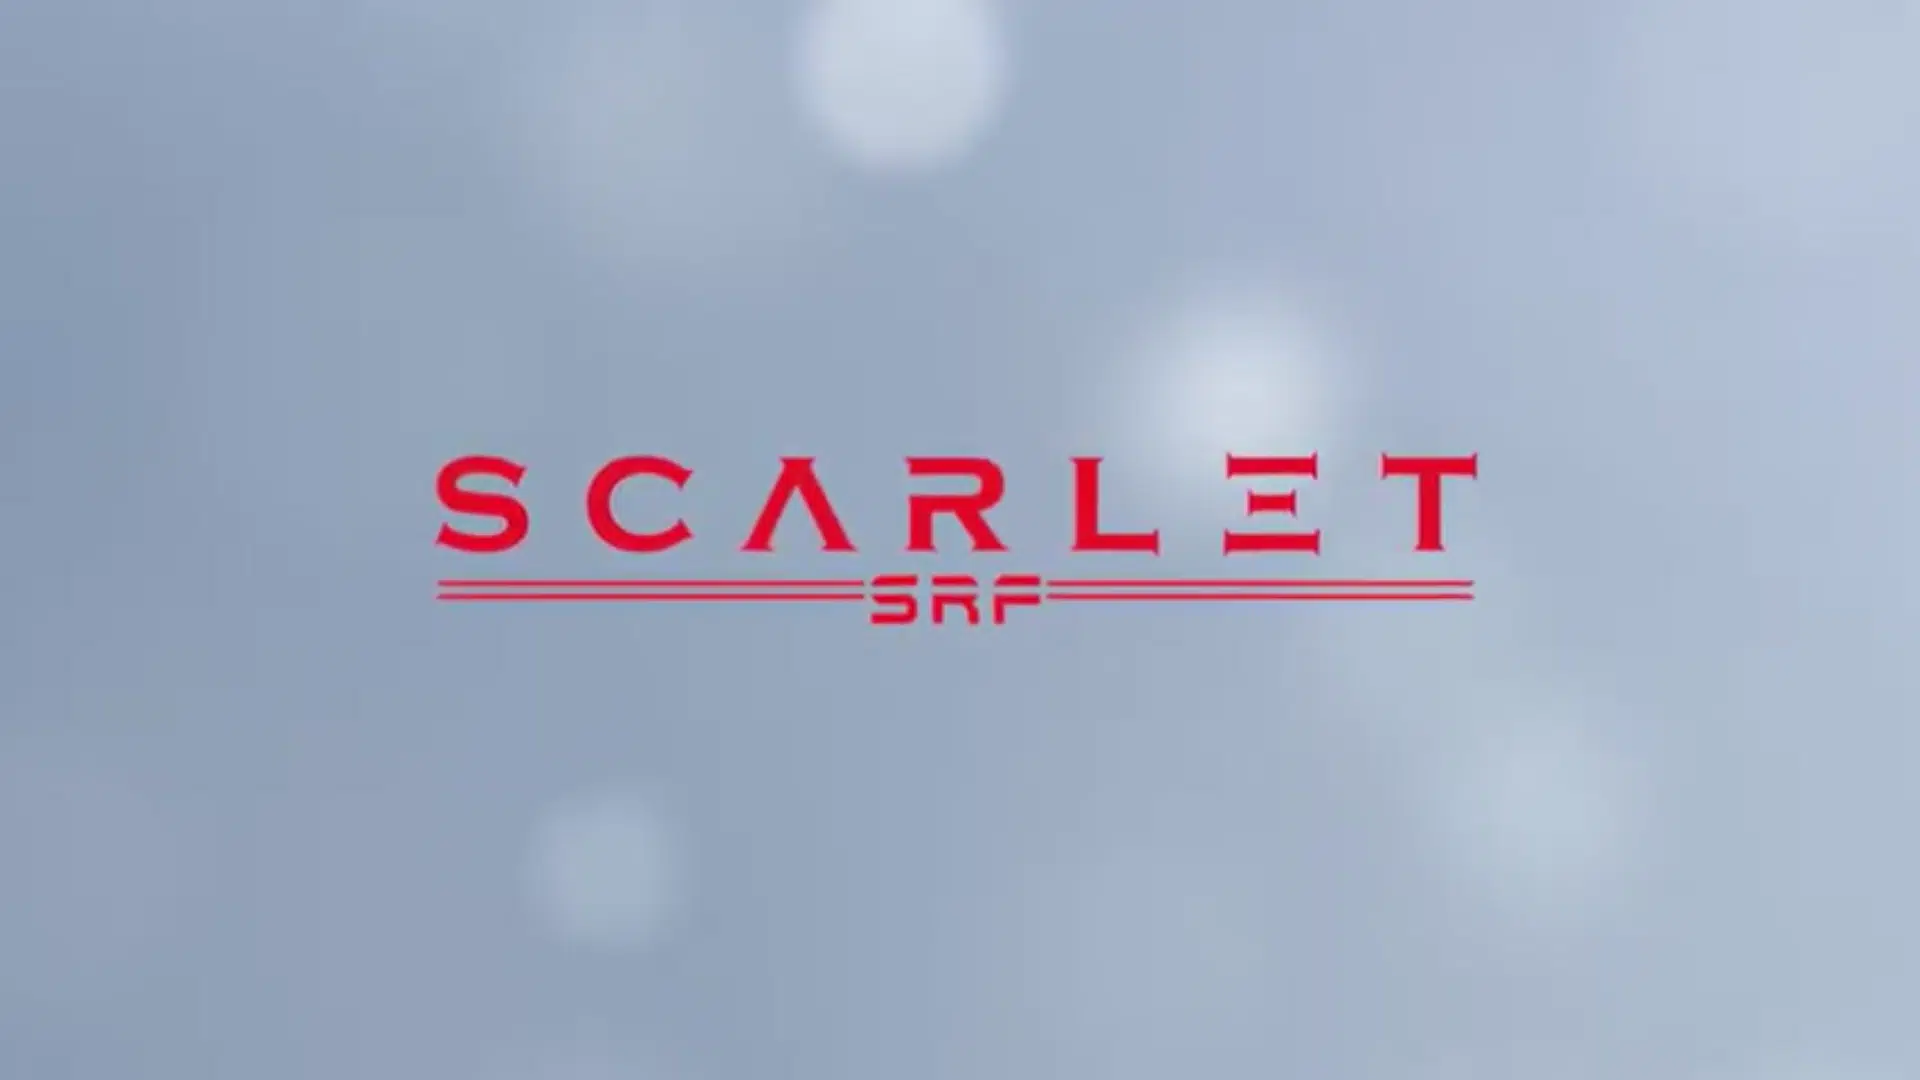 Screenshot 2022 02 16 at 19 21 35 What Makes Scarlet SRF Special.png - Aesthetic Management Partners - Medical Aesthetics Equipment For The Modern Practice